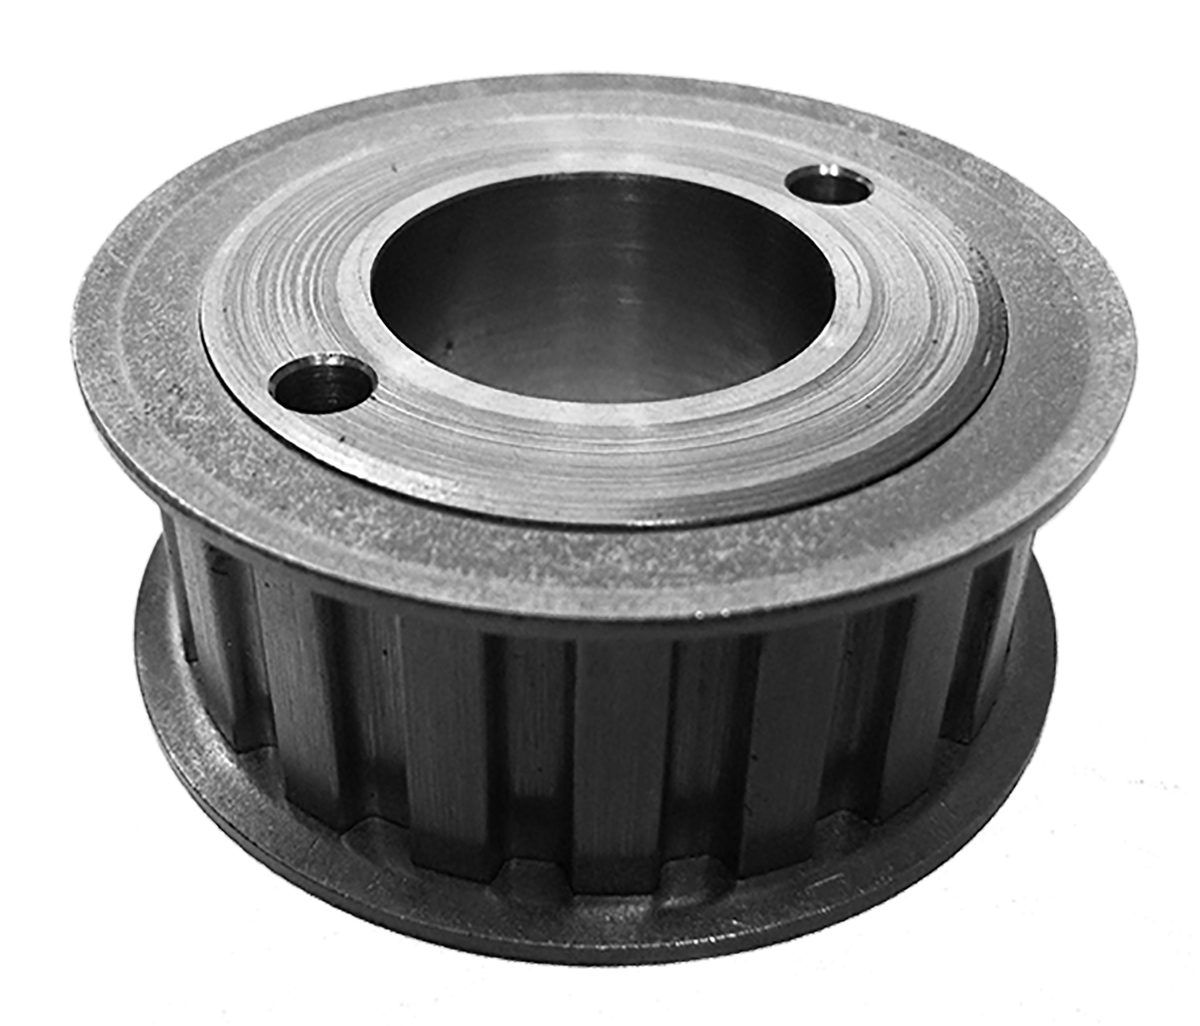 36LP075 - Cast Iron Imperial Pitch Pulleys